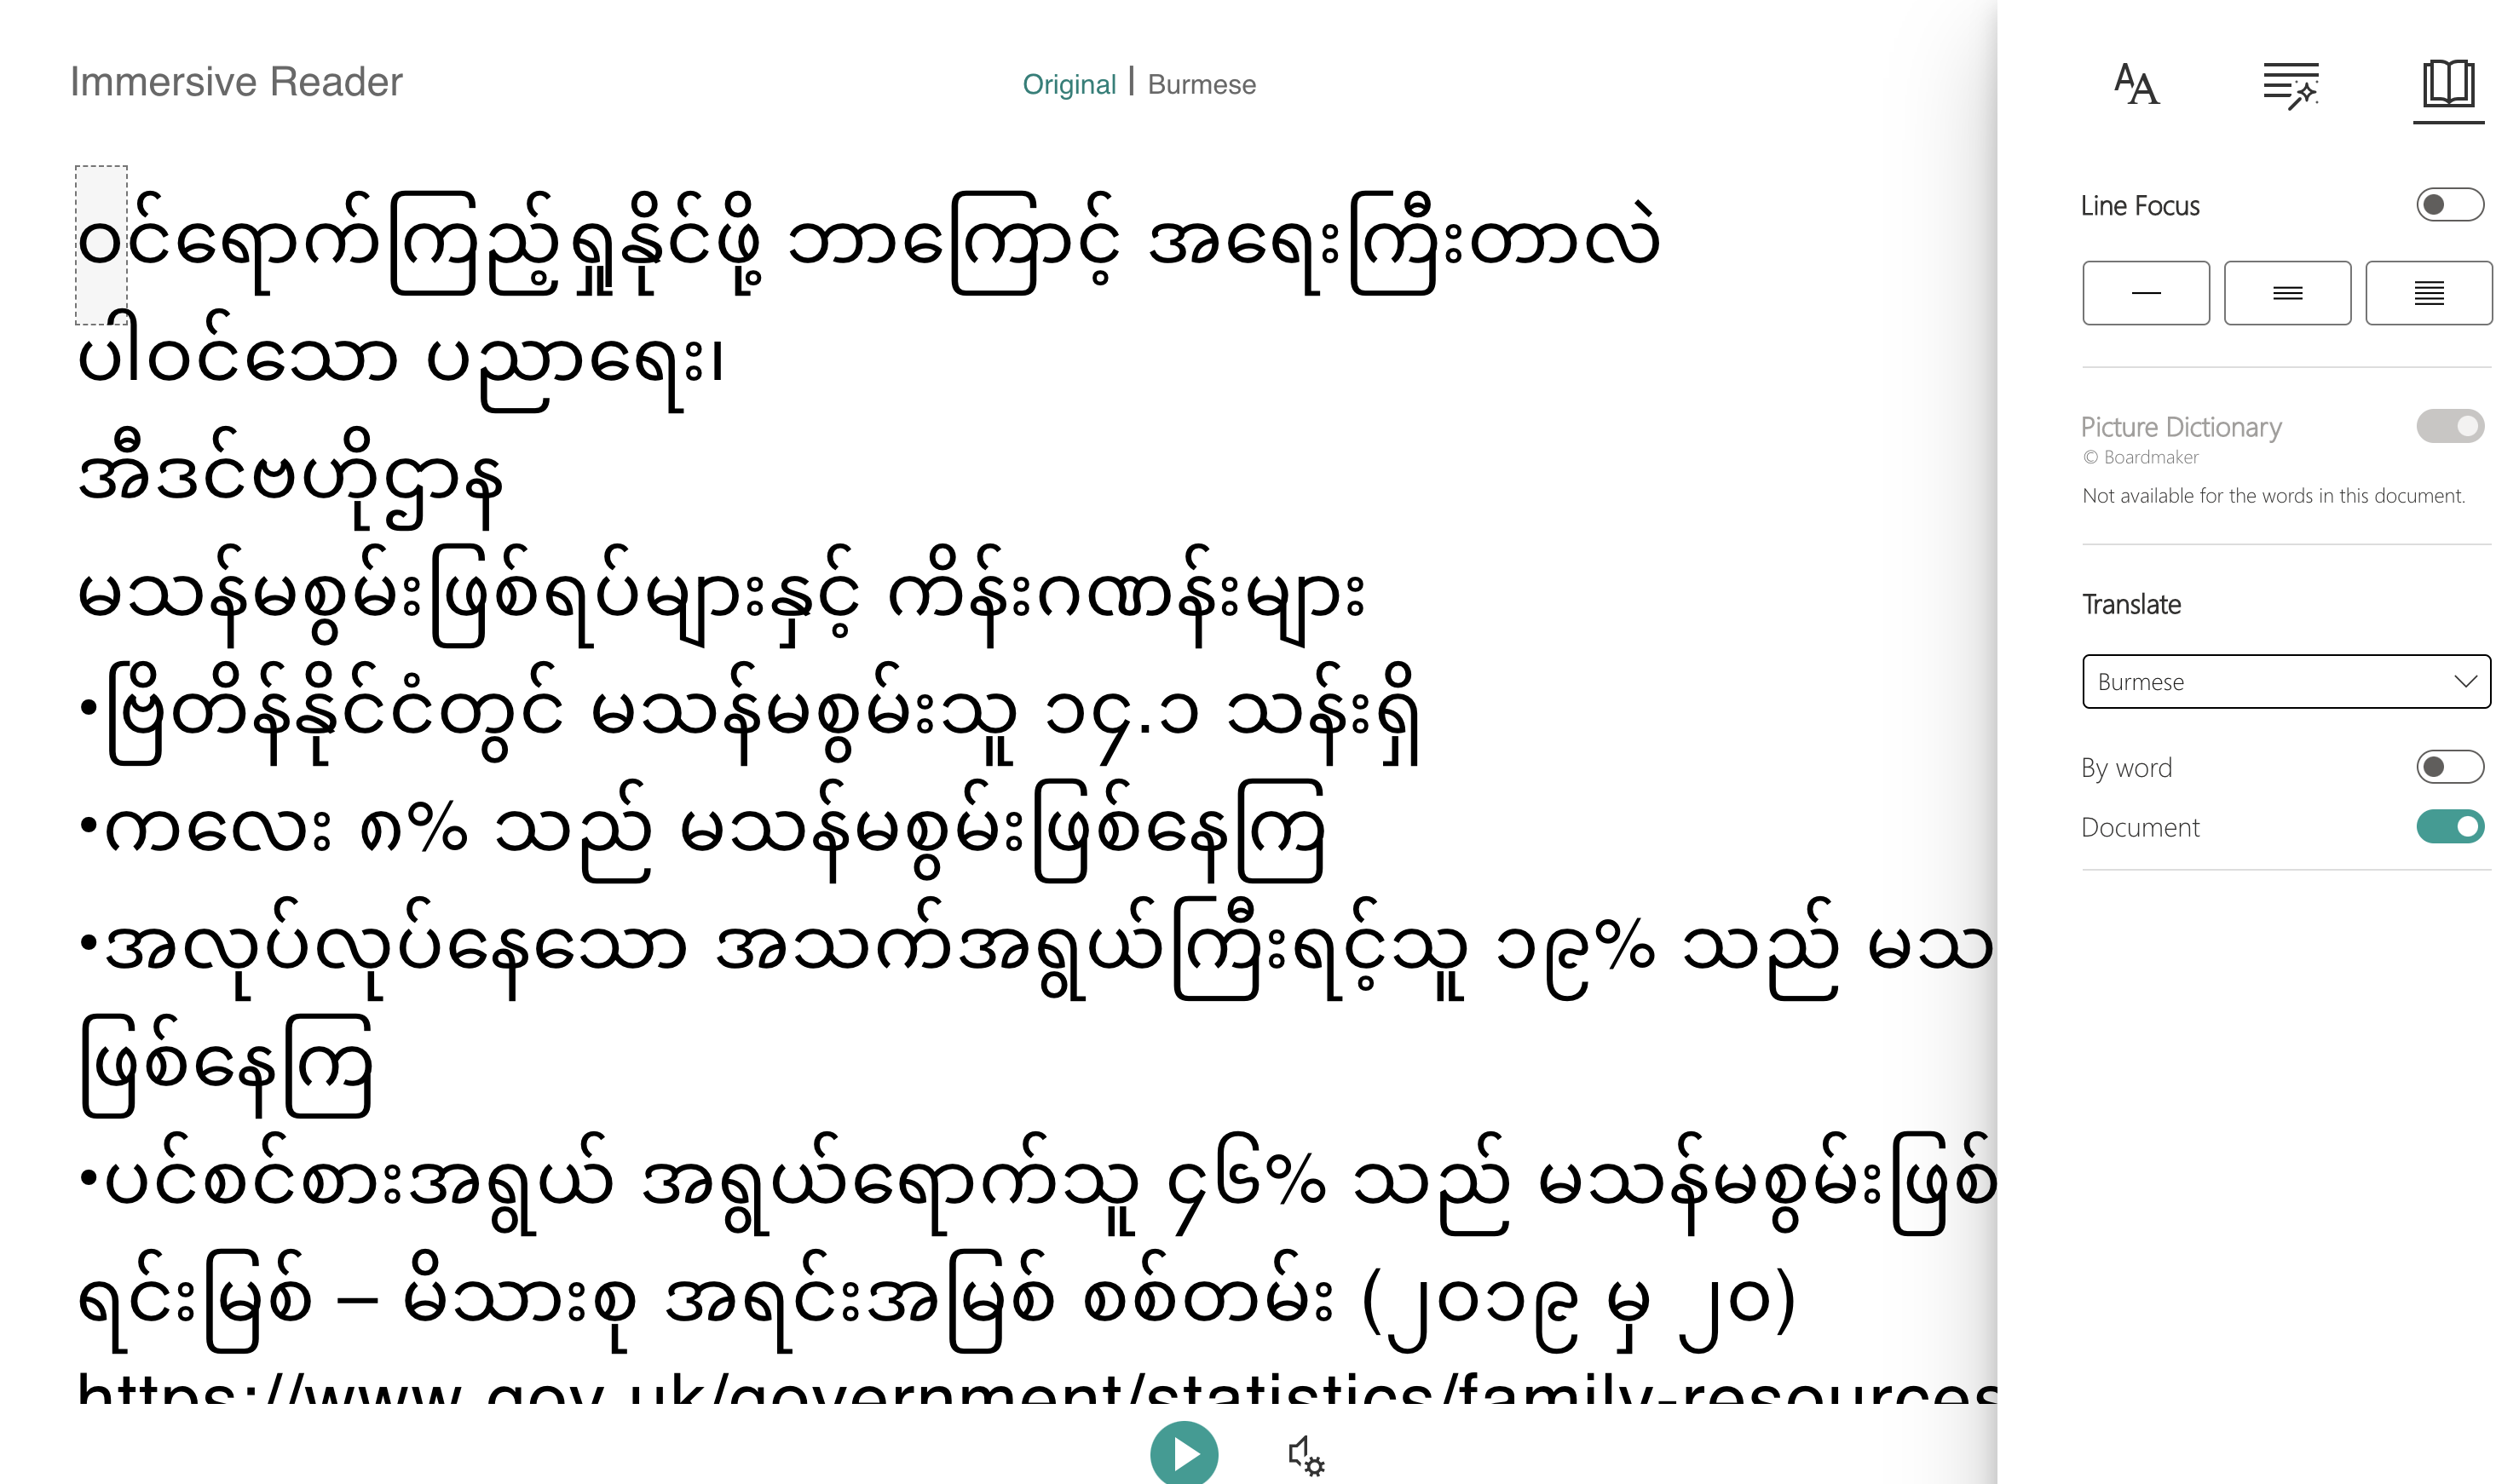 Screenshot of a translation for a whole document in the Immersive Reader.